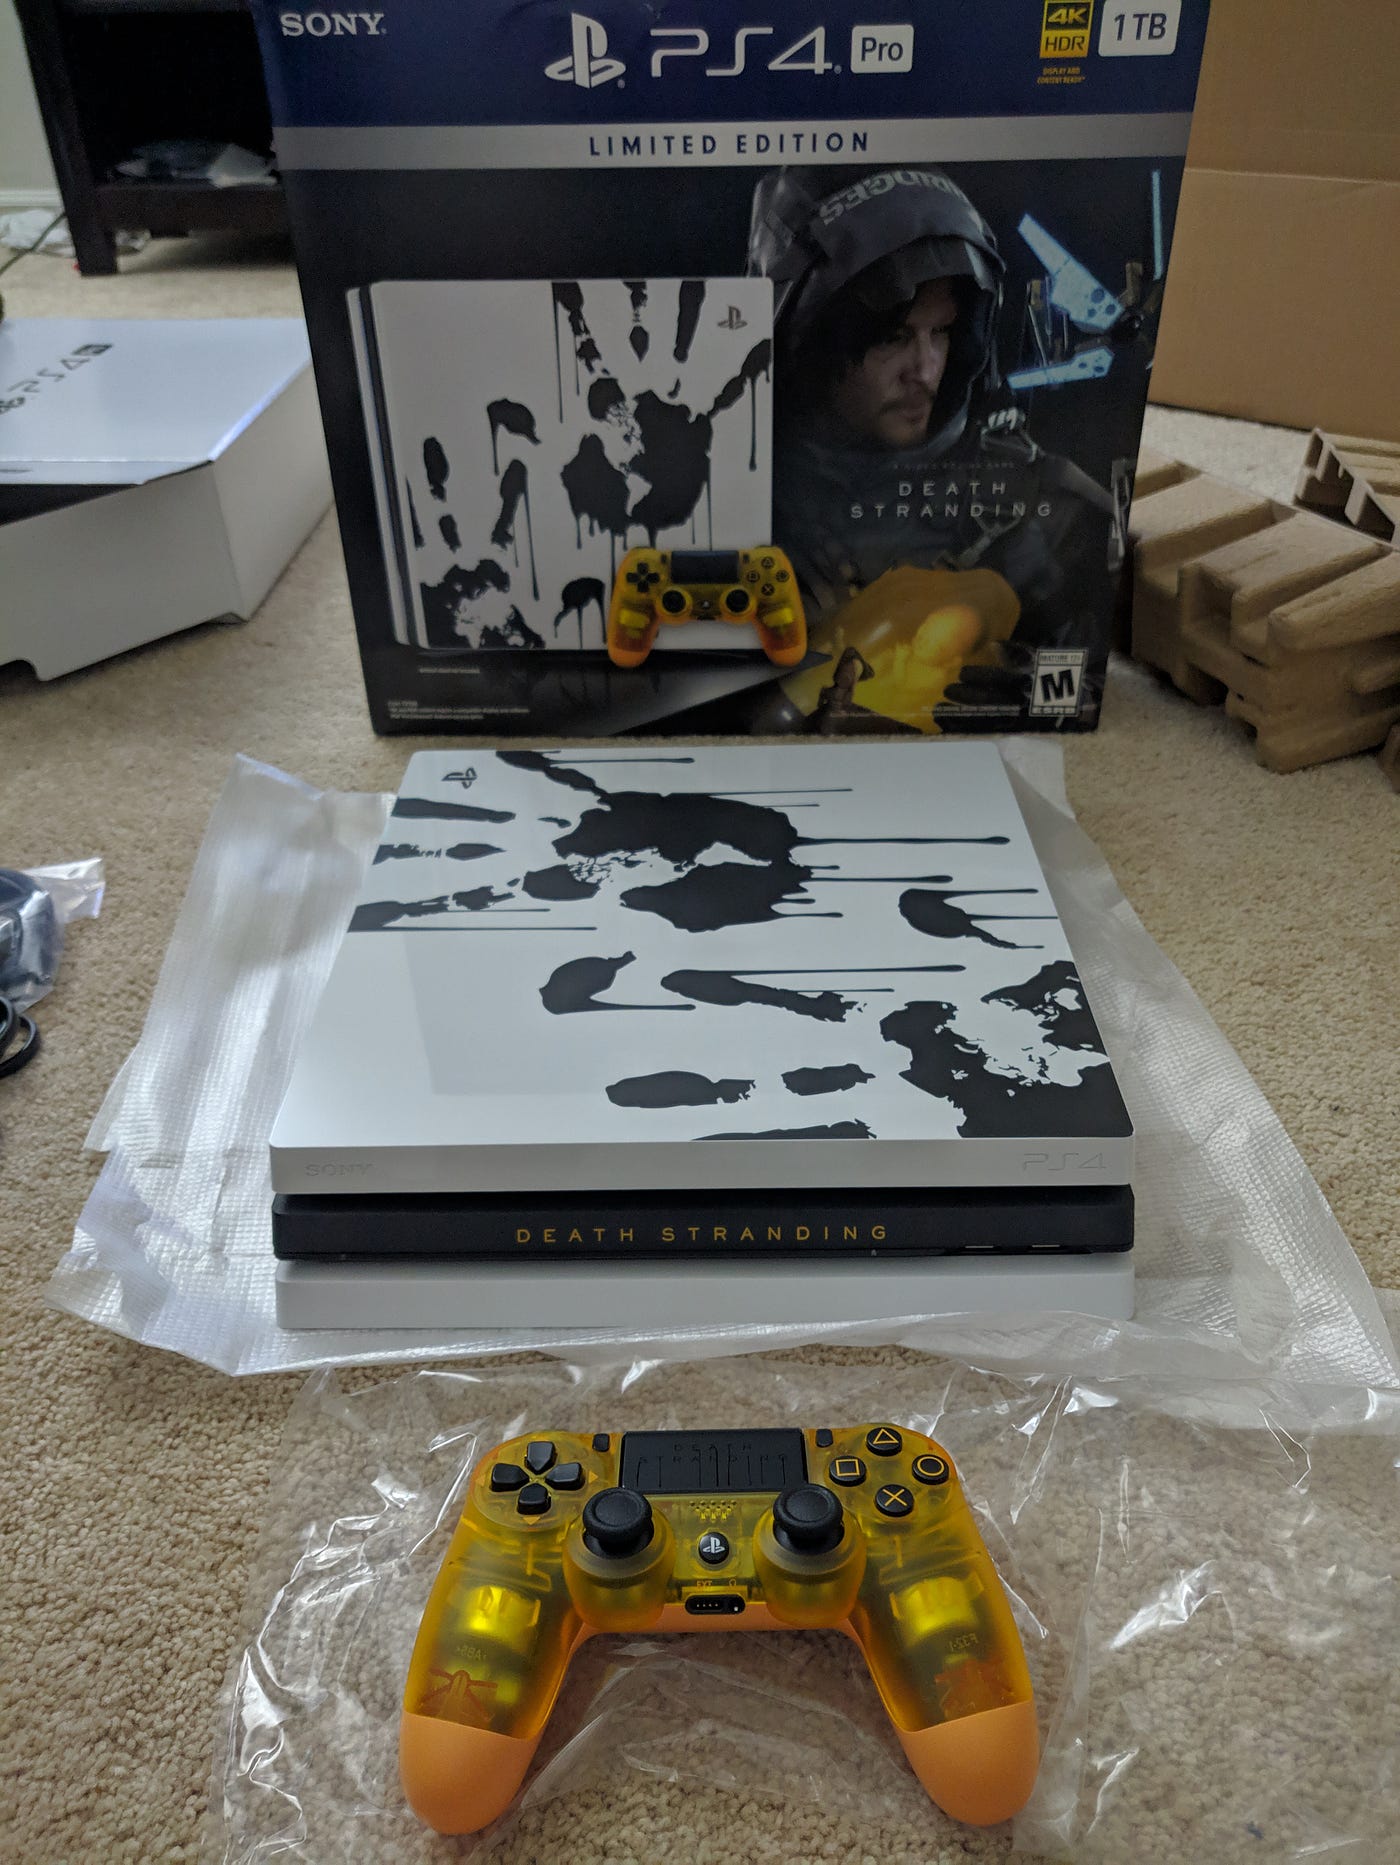 PS4 DEATH STRANDING LIMITED EDITION Pro 1TB Console Box PlayStation 4 [BOX]